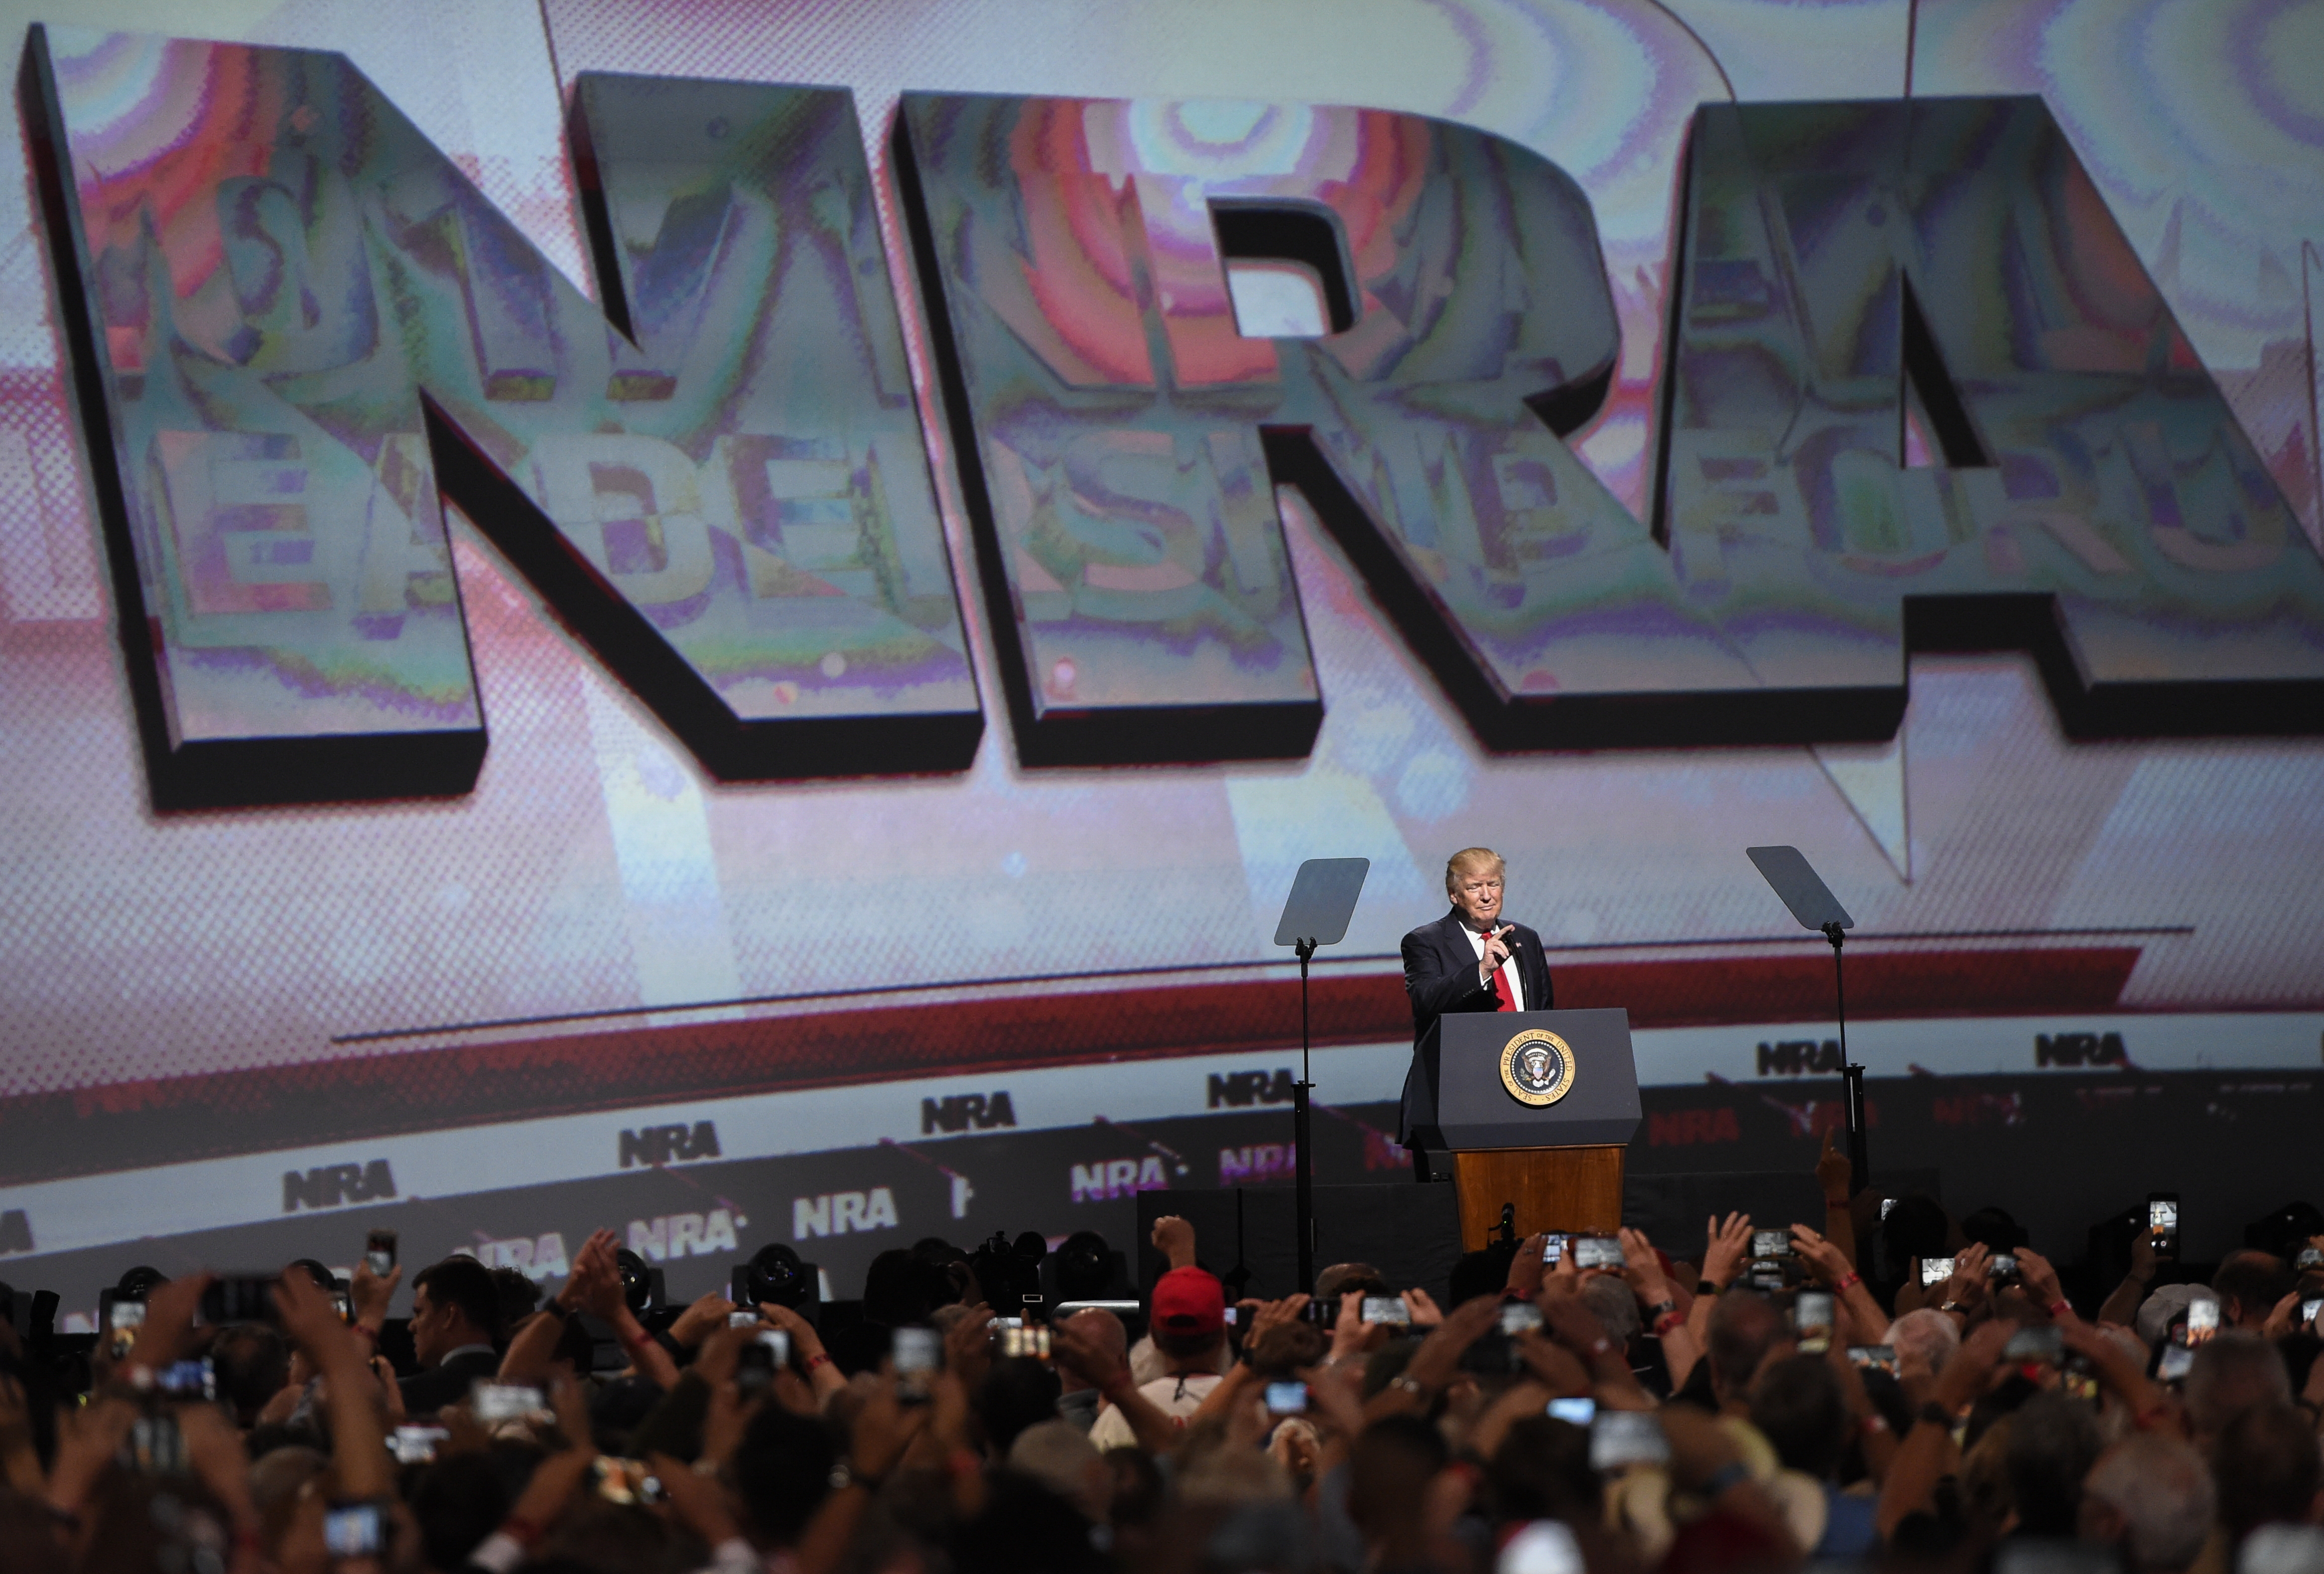 President Donald Trump speaks during the National Rifle Association-ILA Leadership Forum, April 28, 2017, in Atlanta. The NRA is holding its 146th annual meetings and exhibits forum at the Georgia World Congress Center. (Mike Stewart—AP)